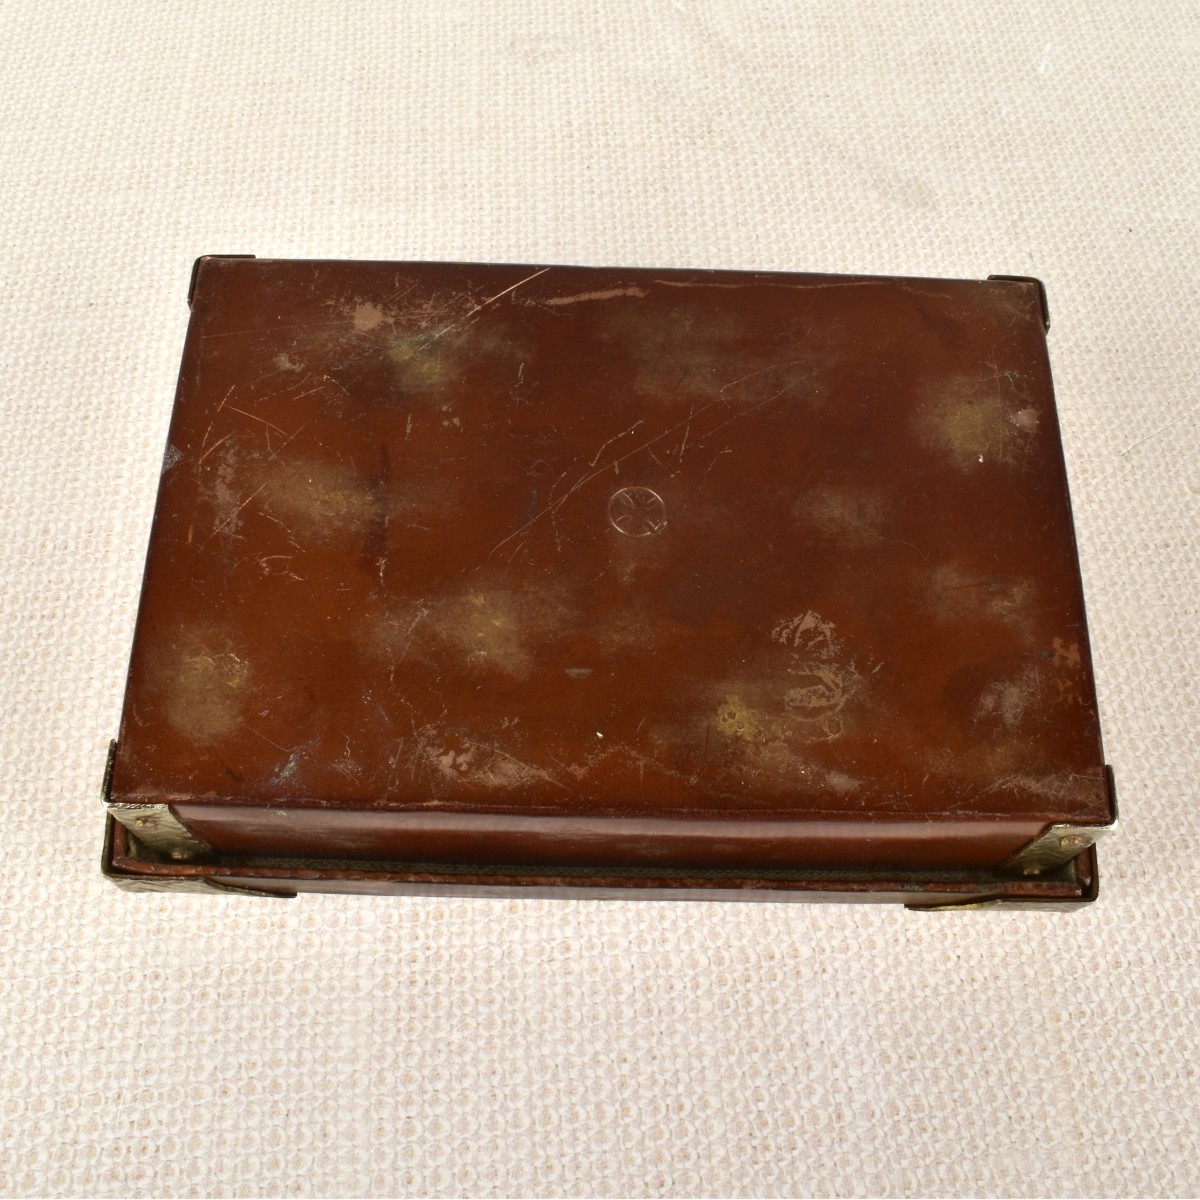 Japanese Enamel Box with Cover